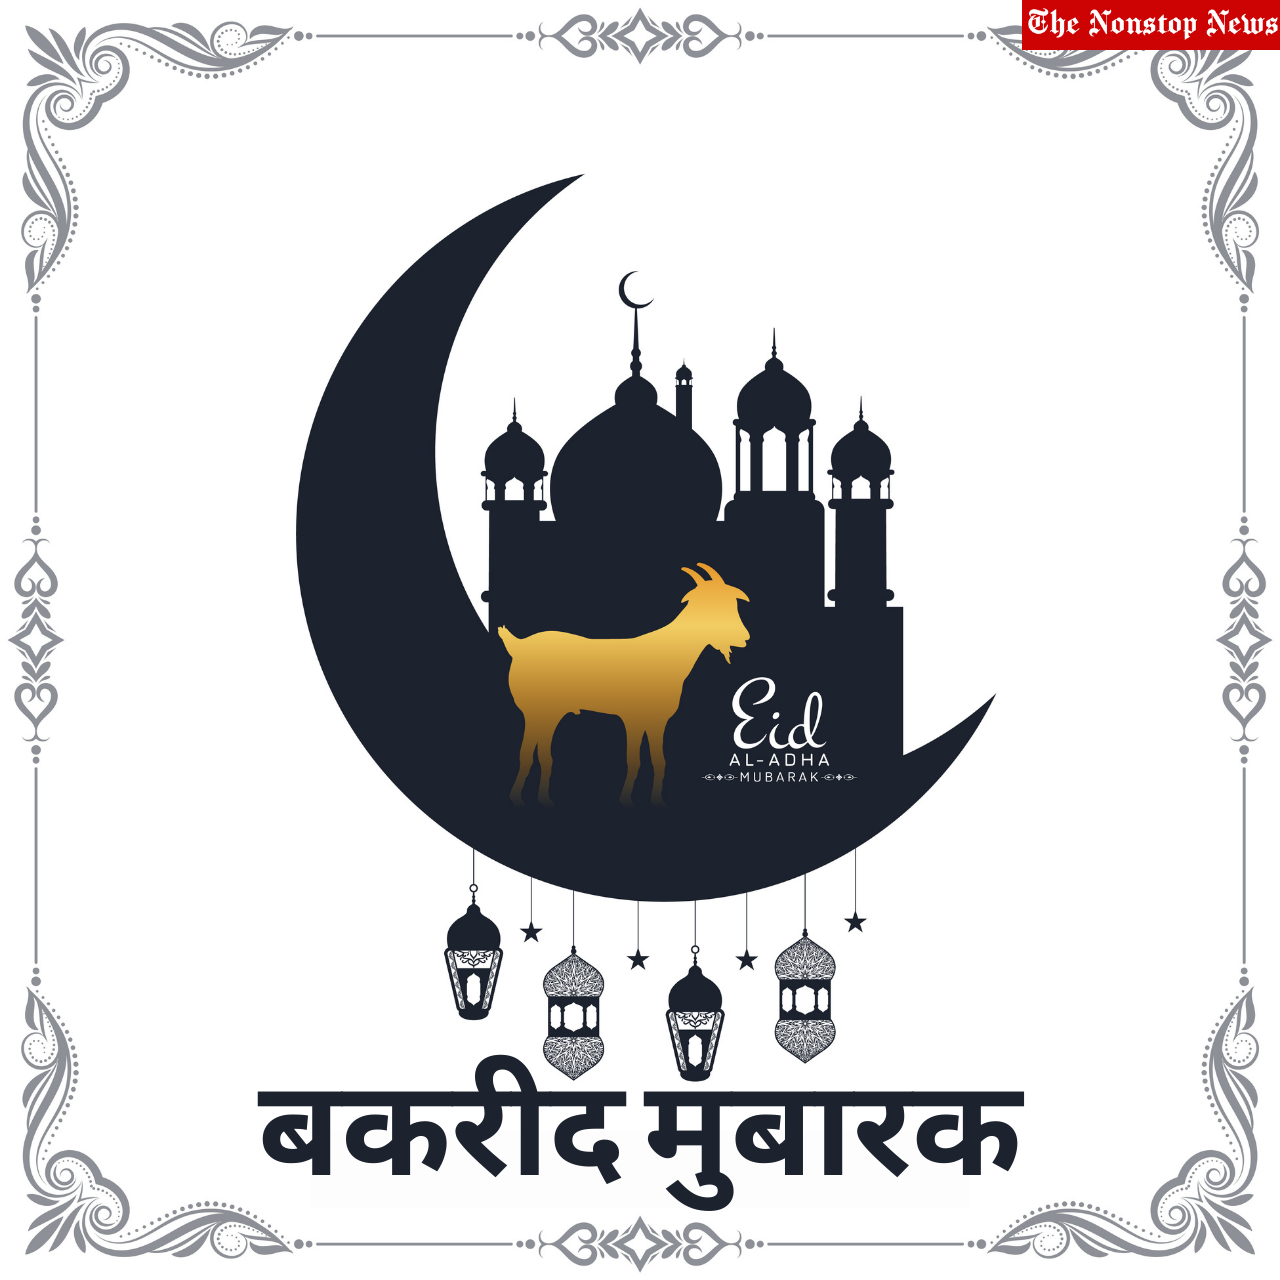 Bakrid Mubarak 2021 Hindi Wishes, Images, Quotes, Shayari, Greetings, Status, Messages, and Dua to greet your Friend, Relative, or Loved Ones on Eid Ul Adha